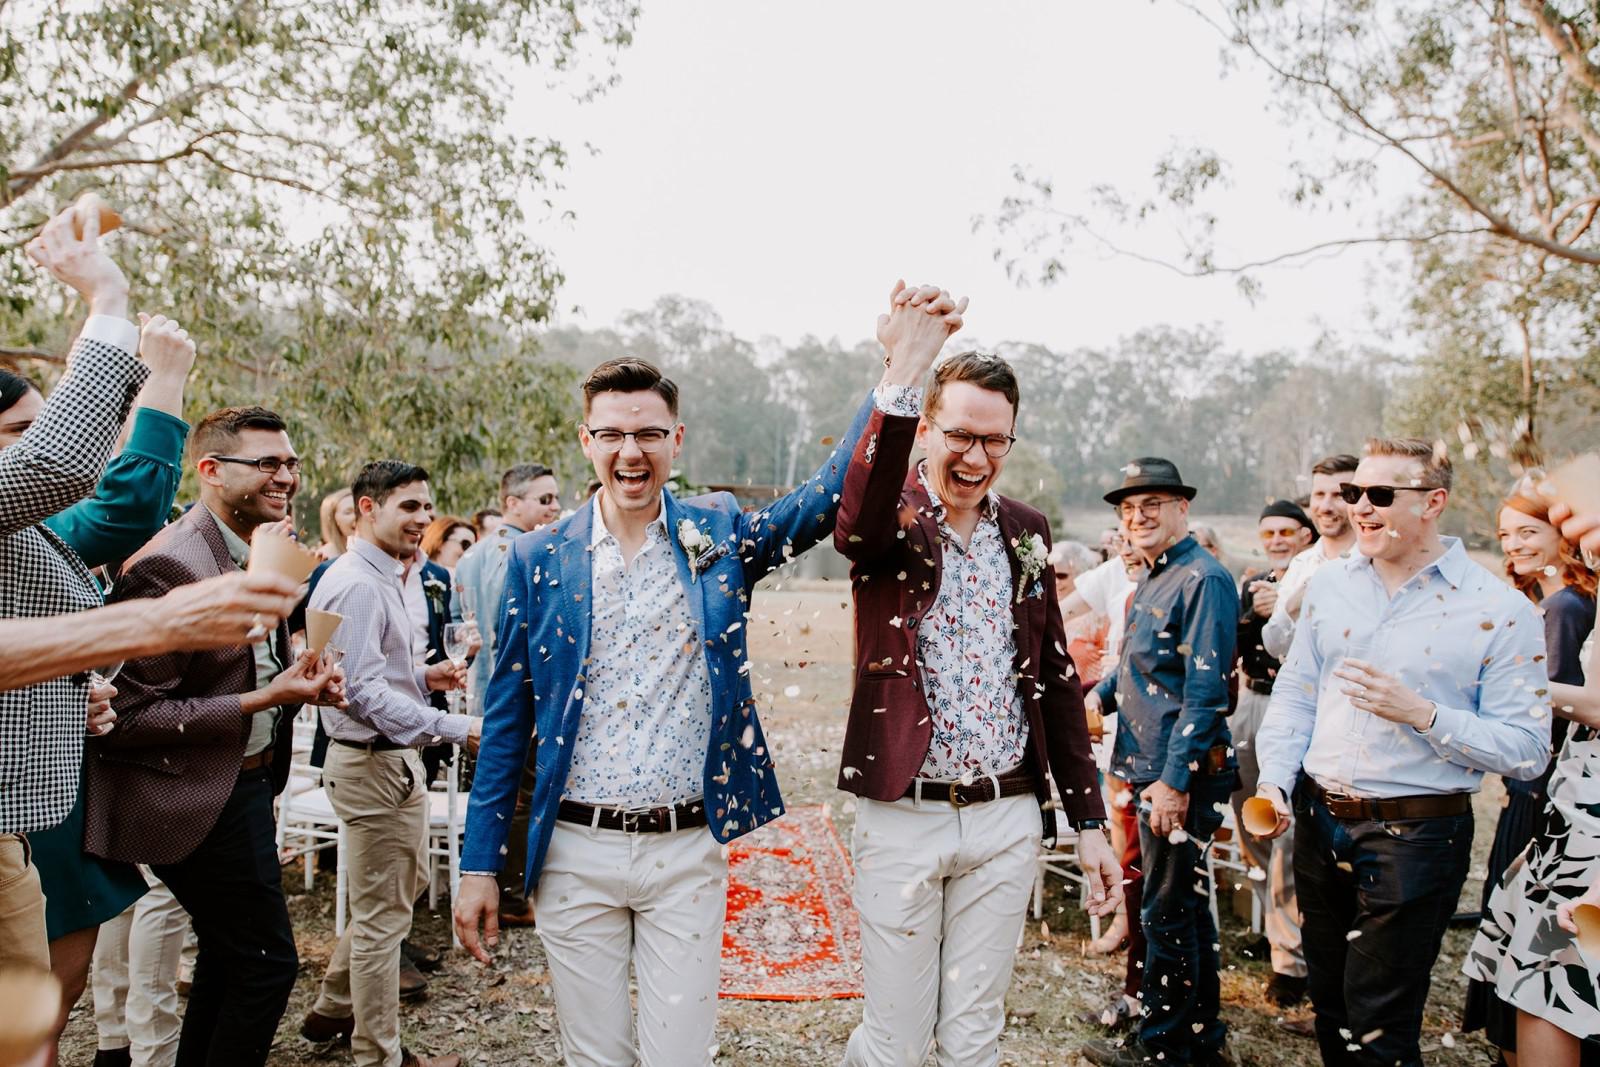 Men getting married by Sandra Henri Photography